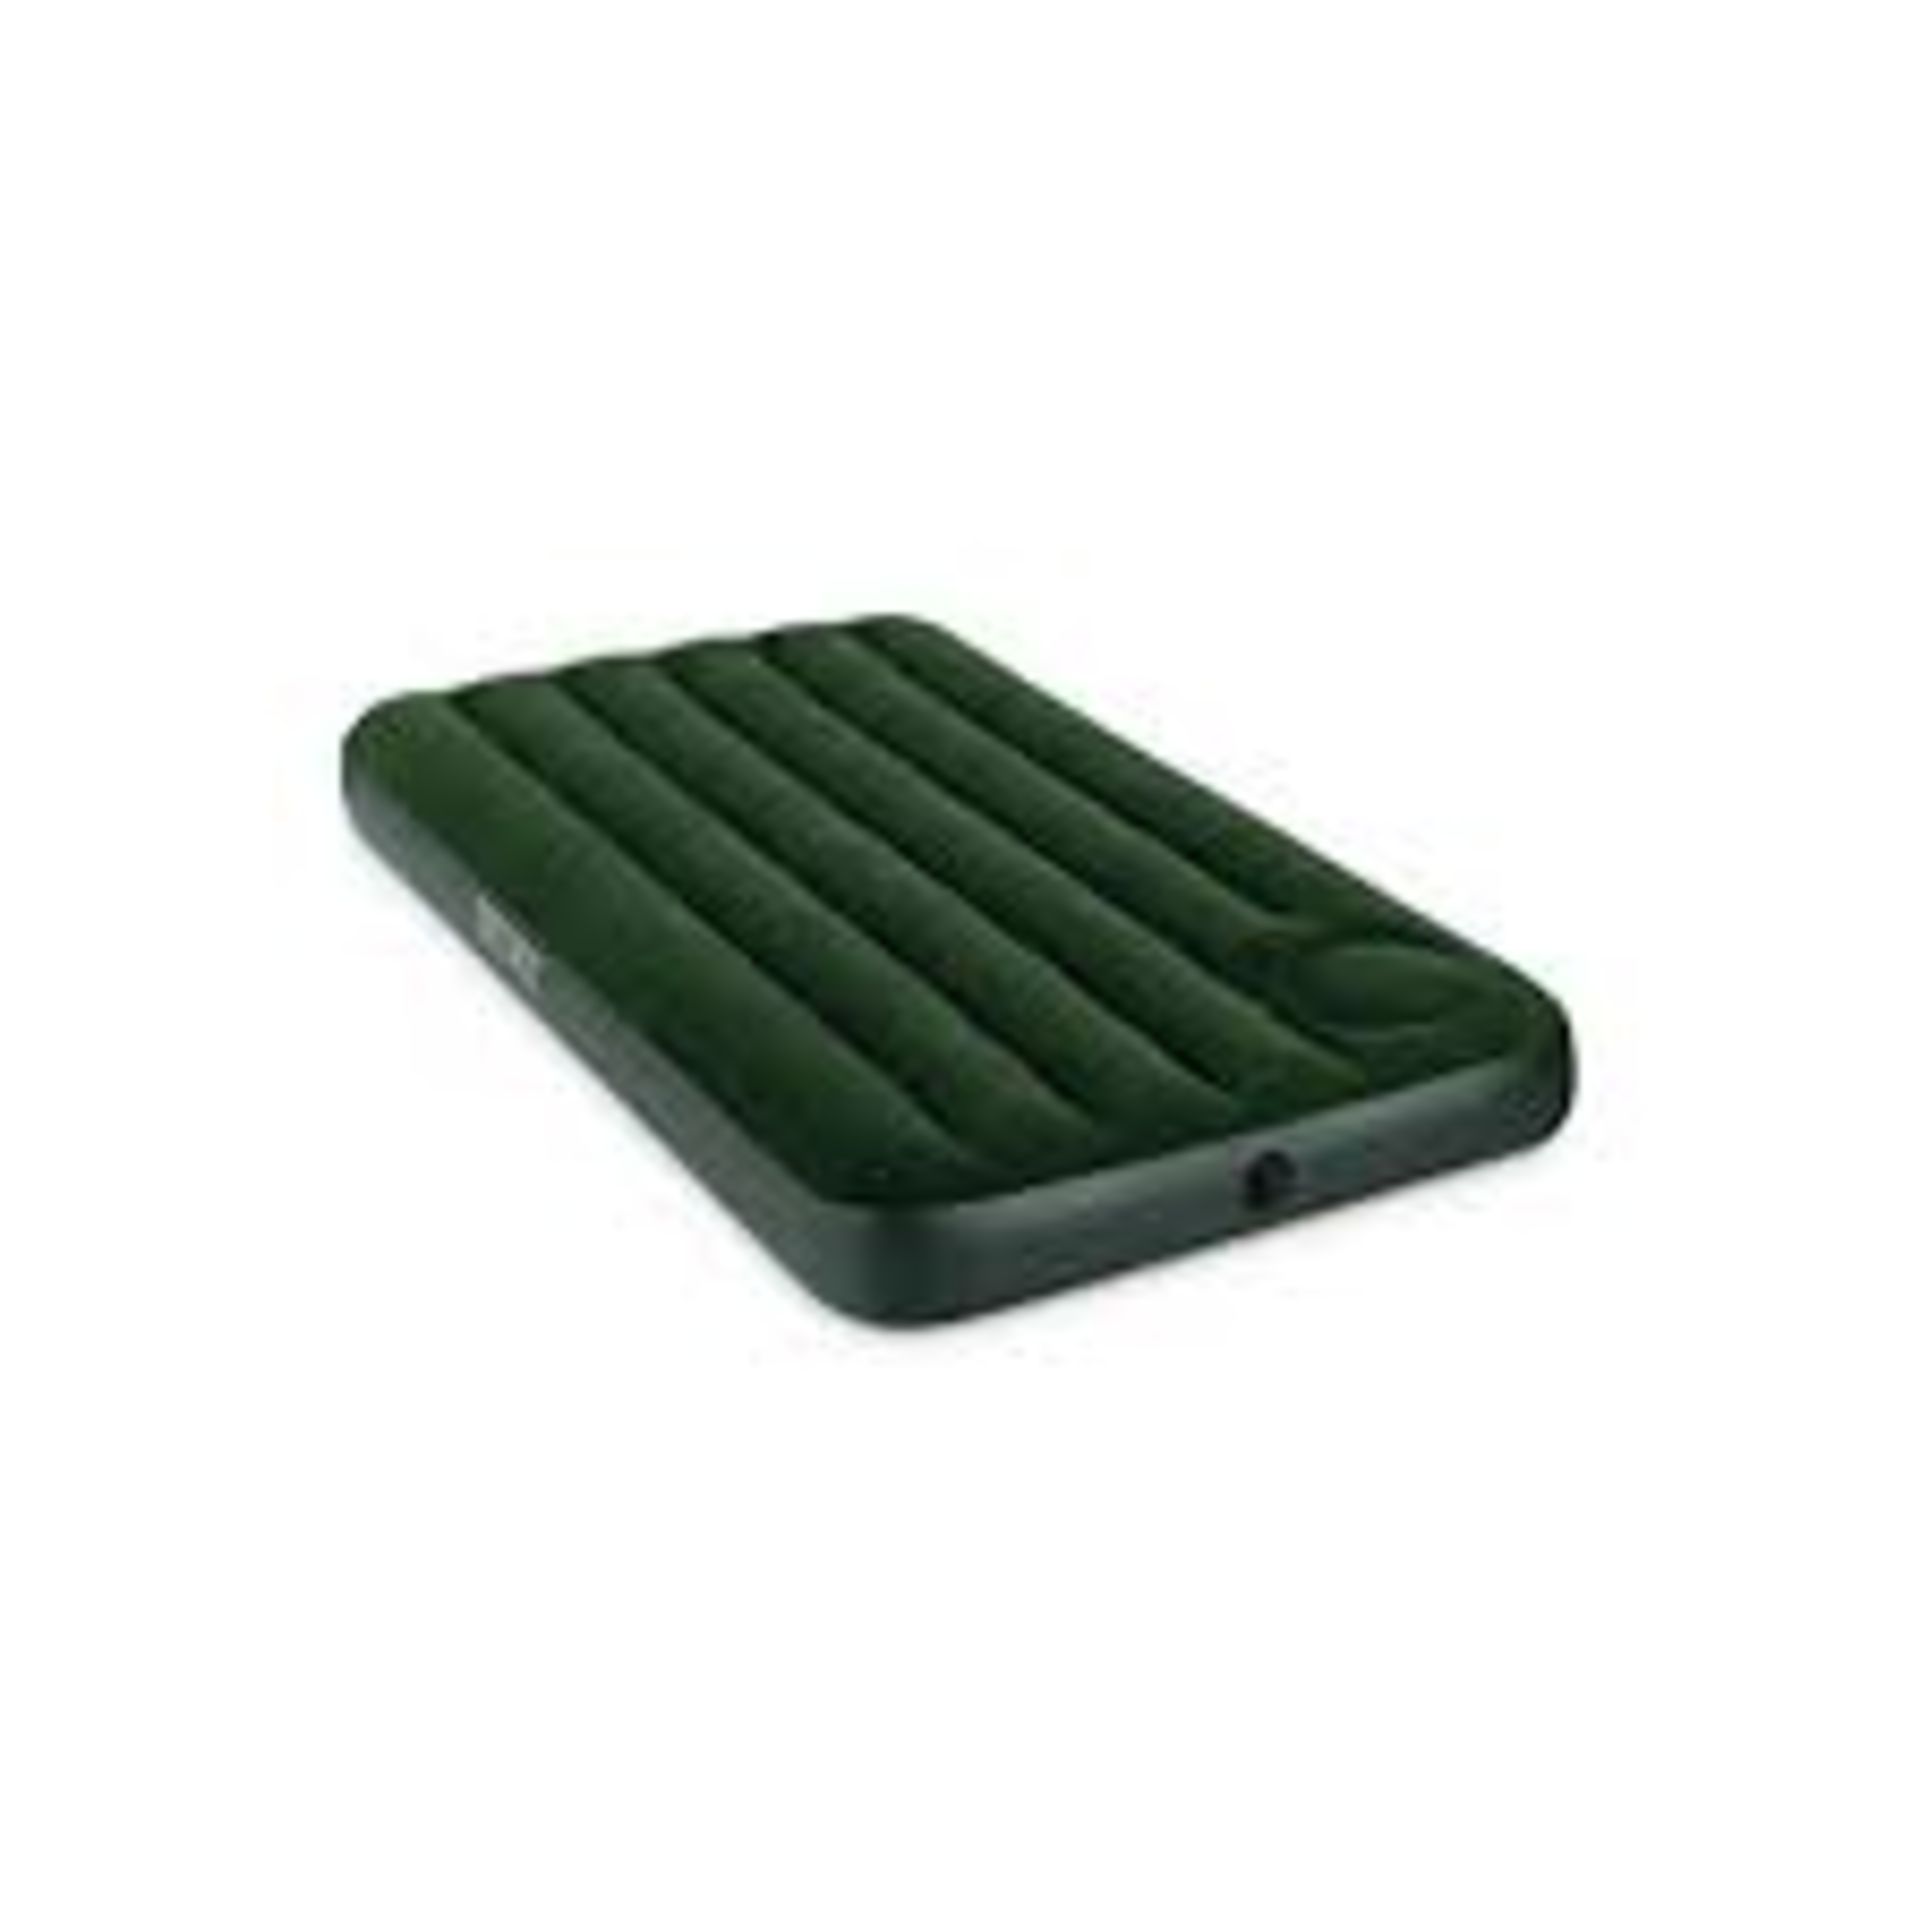 + VAT Brand New Intex Airbed With Built In Foot Pump - ISP £14.99 (Group On)